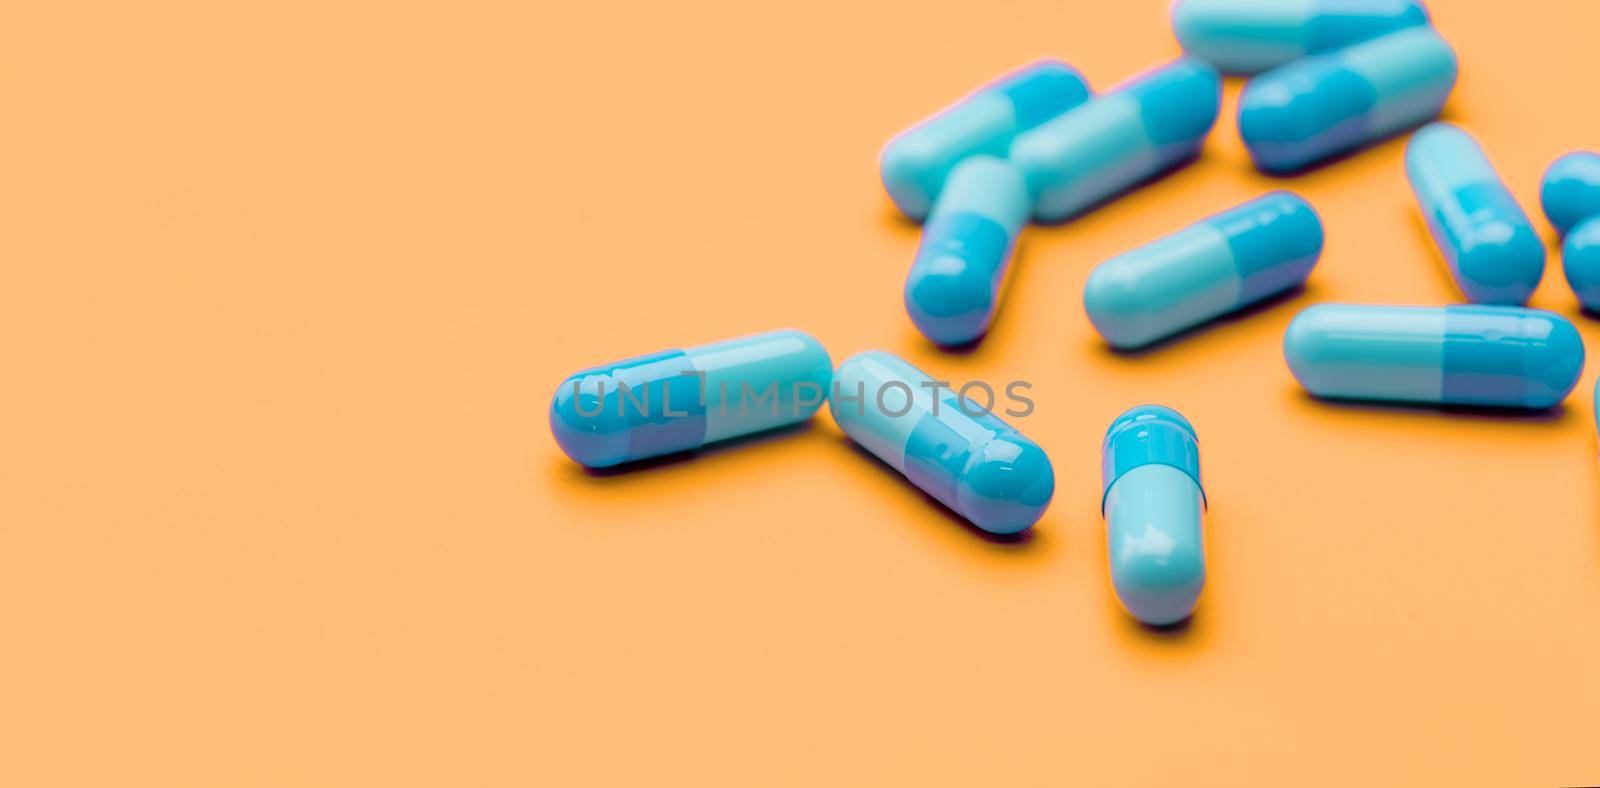 Blue antibiotic capsule pills spread on yellow background. Antibiotic drug resistance. Pharmaceutical industry. Healthcare and medicine concept. Health budget concept. Capsule manufacturing industry.